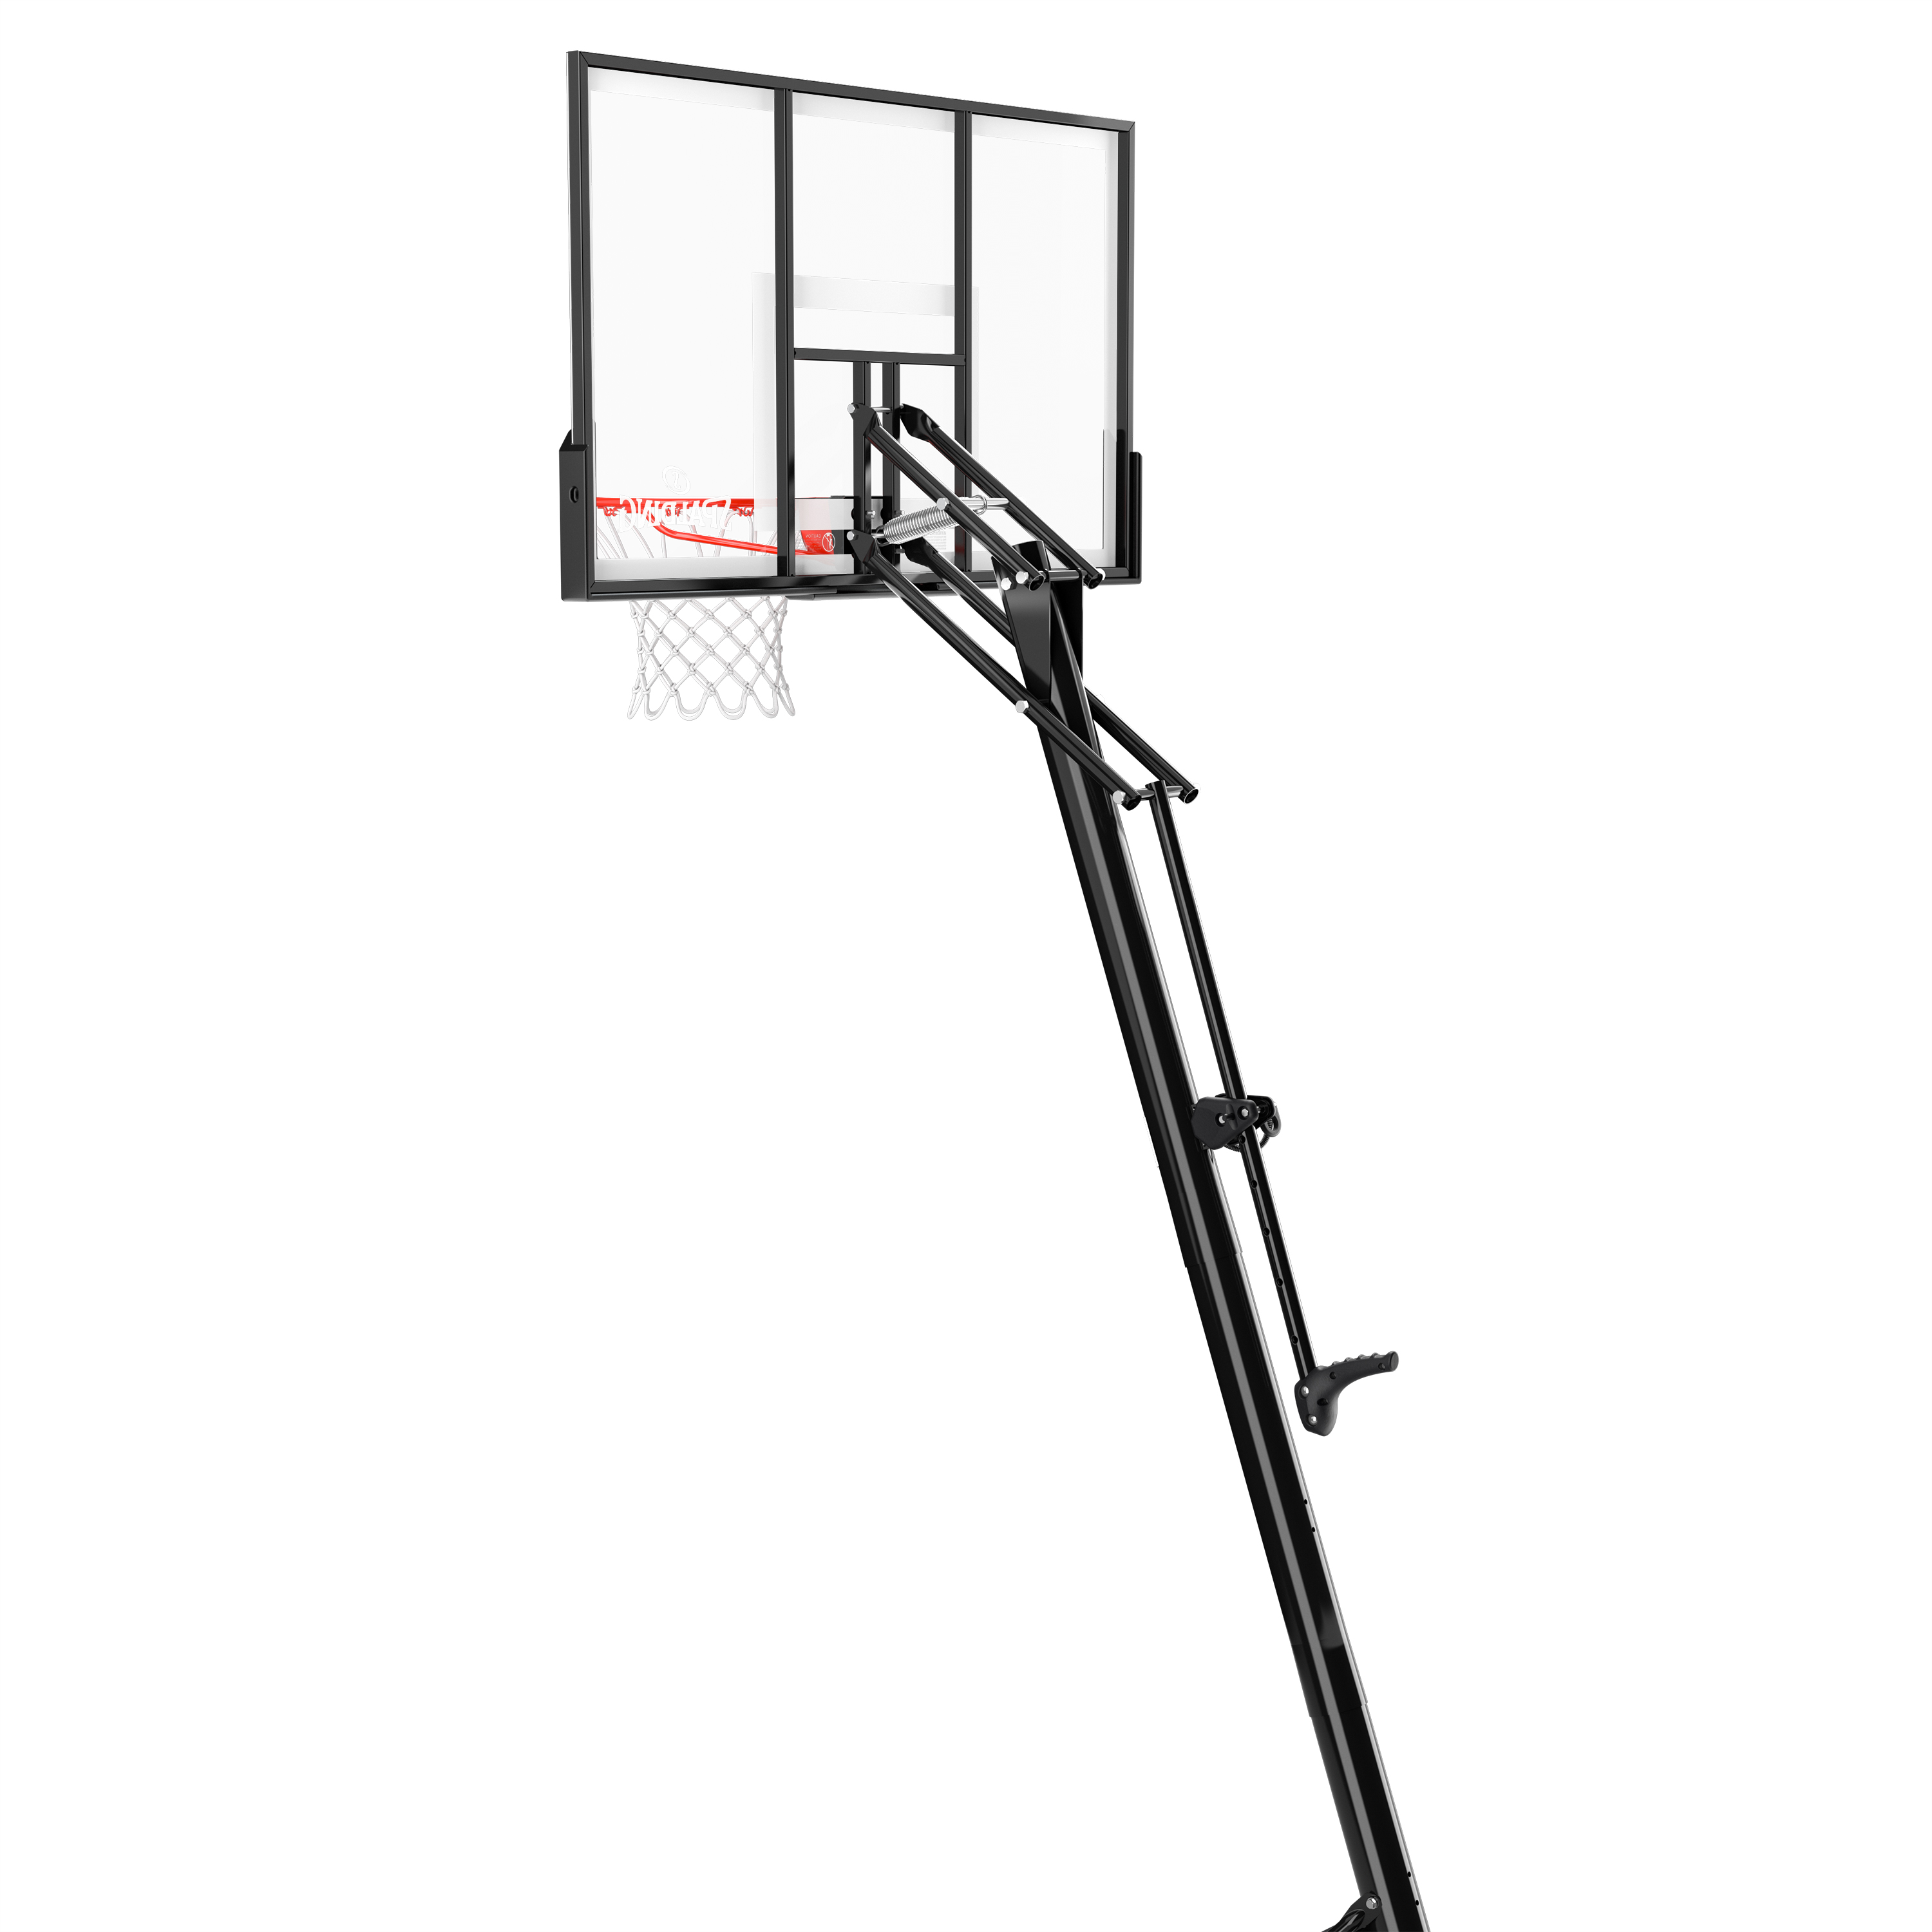 Spalding 54 inch Shatter-proof Polycarbonate Exacta Height® Portable Basketball Hoop System - image 6 of 12